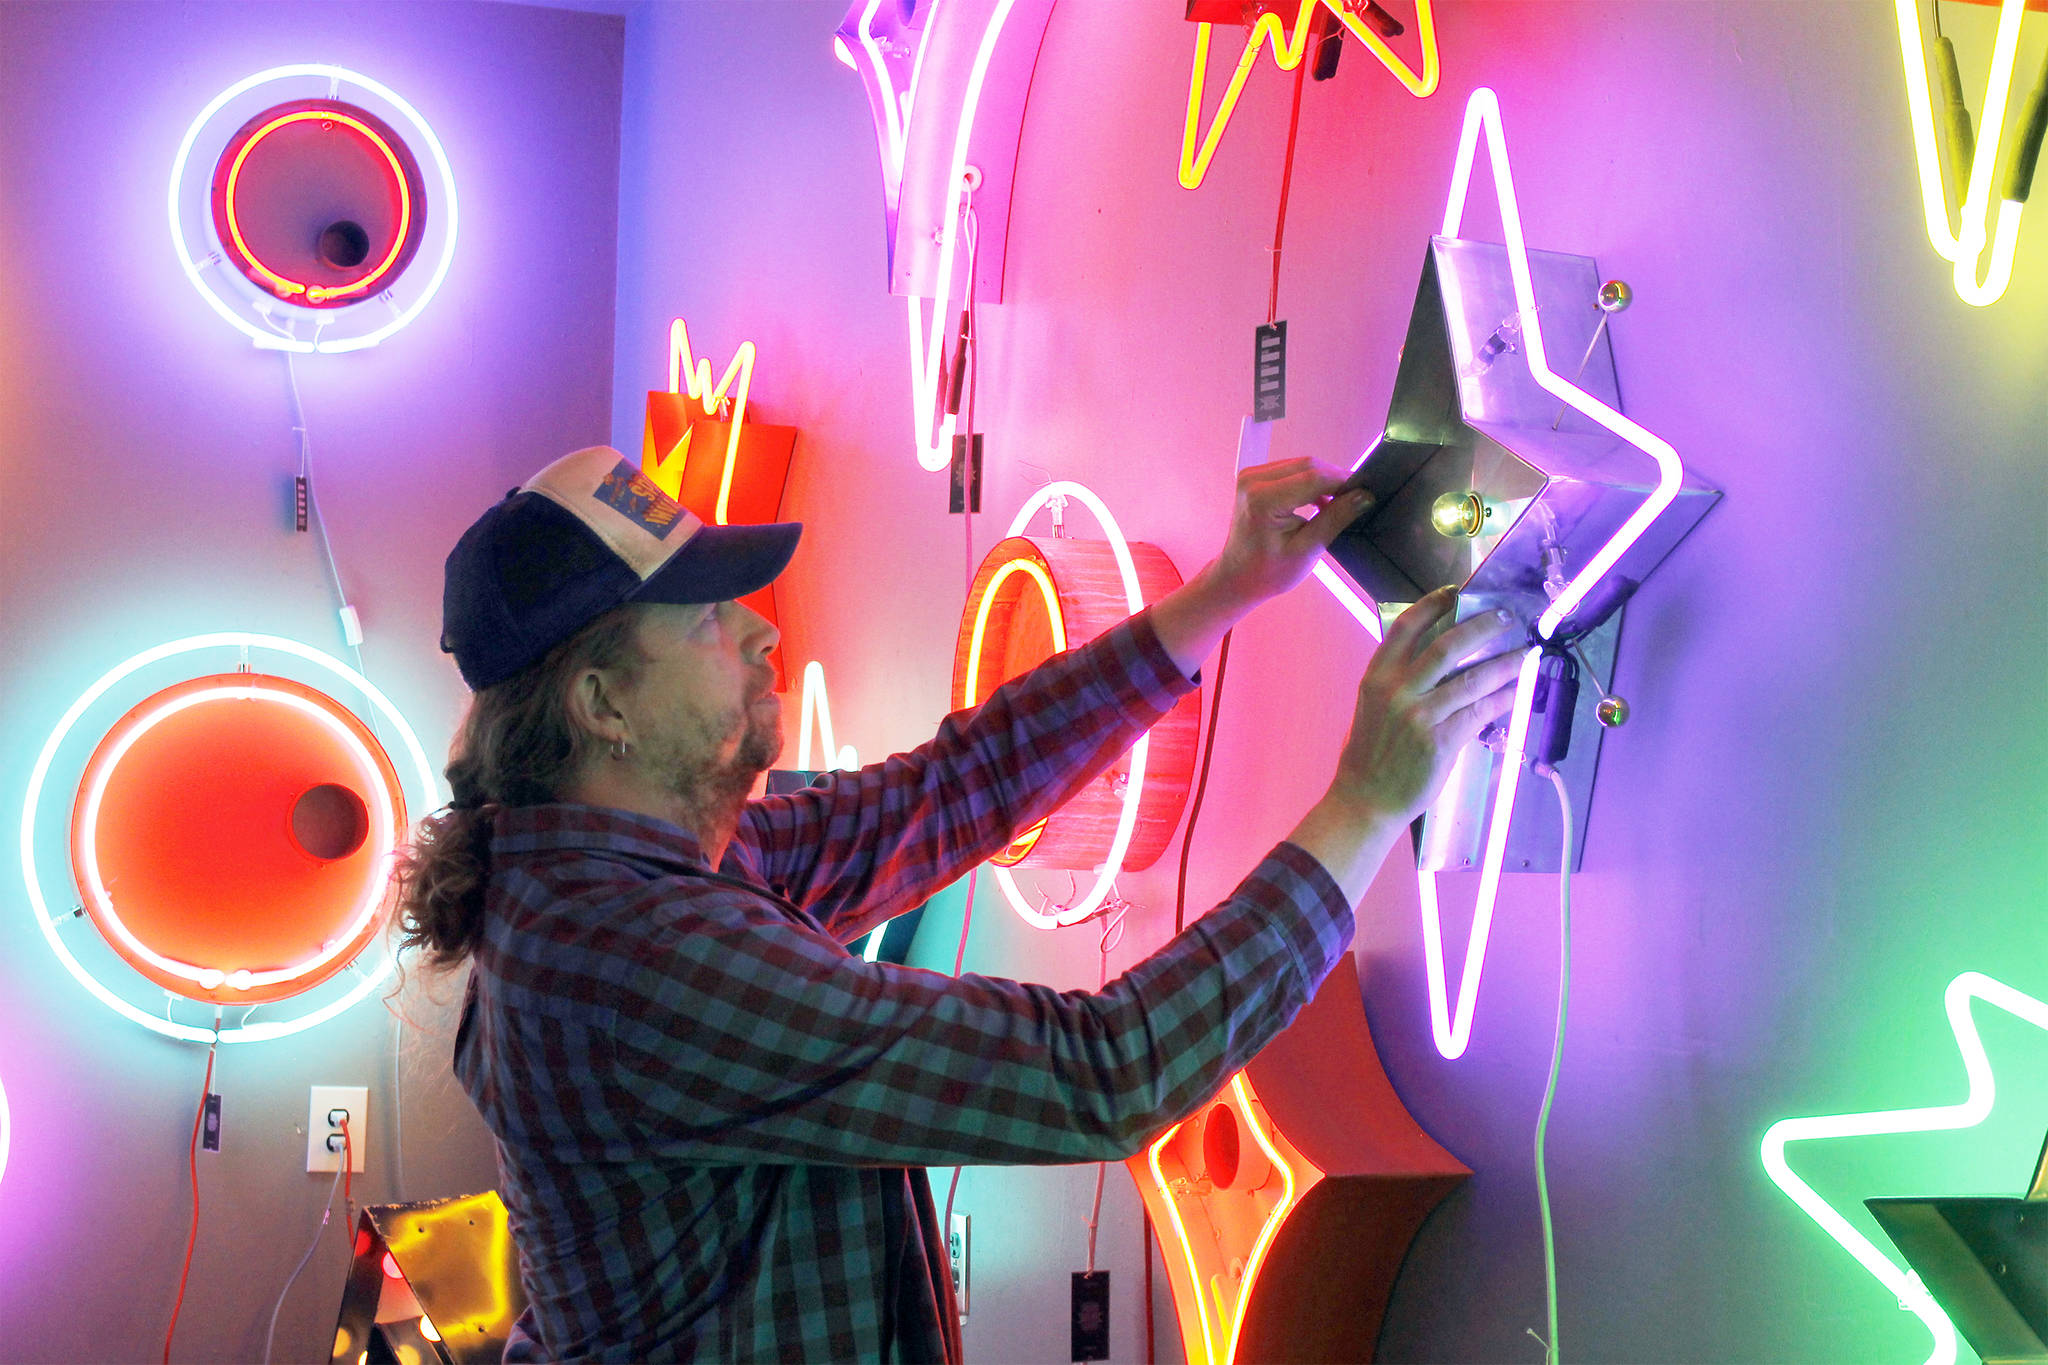 Tim Leonard, owner of the Machine Shop in Langley, hangs a purple neon star he made on the wall of his arcade. Photo by Kira Erickson/Whidbey News Group